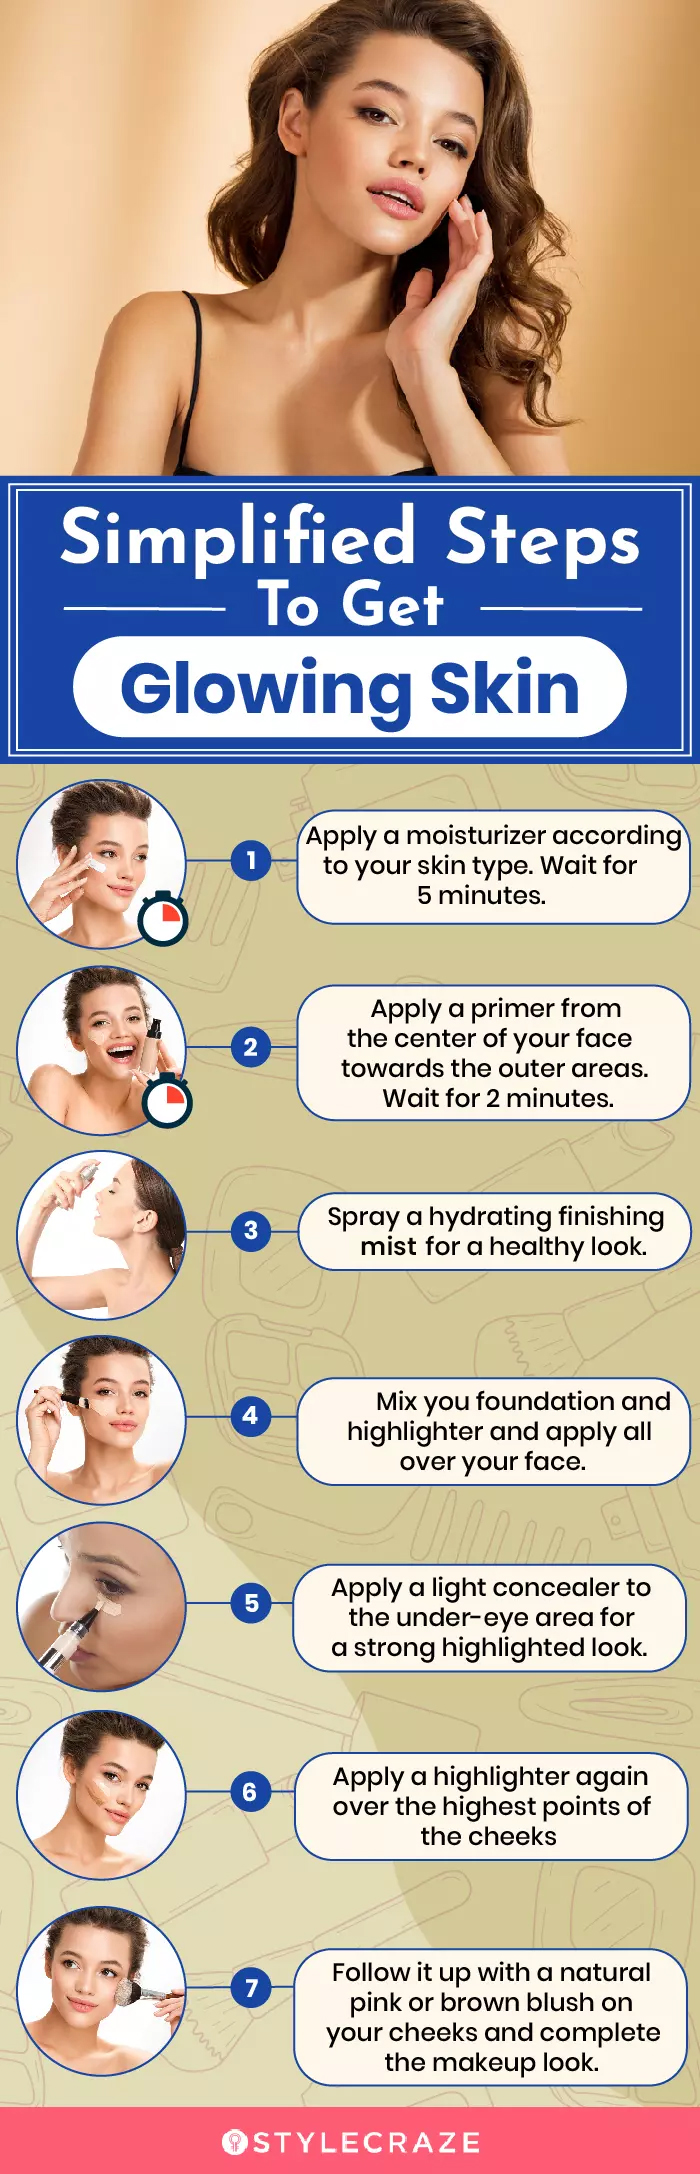 simplifed steps to get glowing skin (infographic)